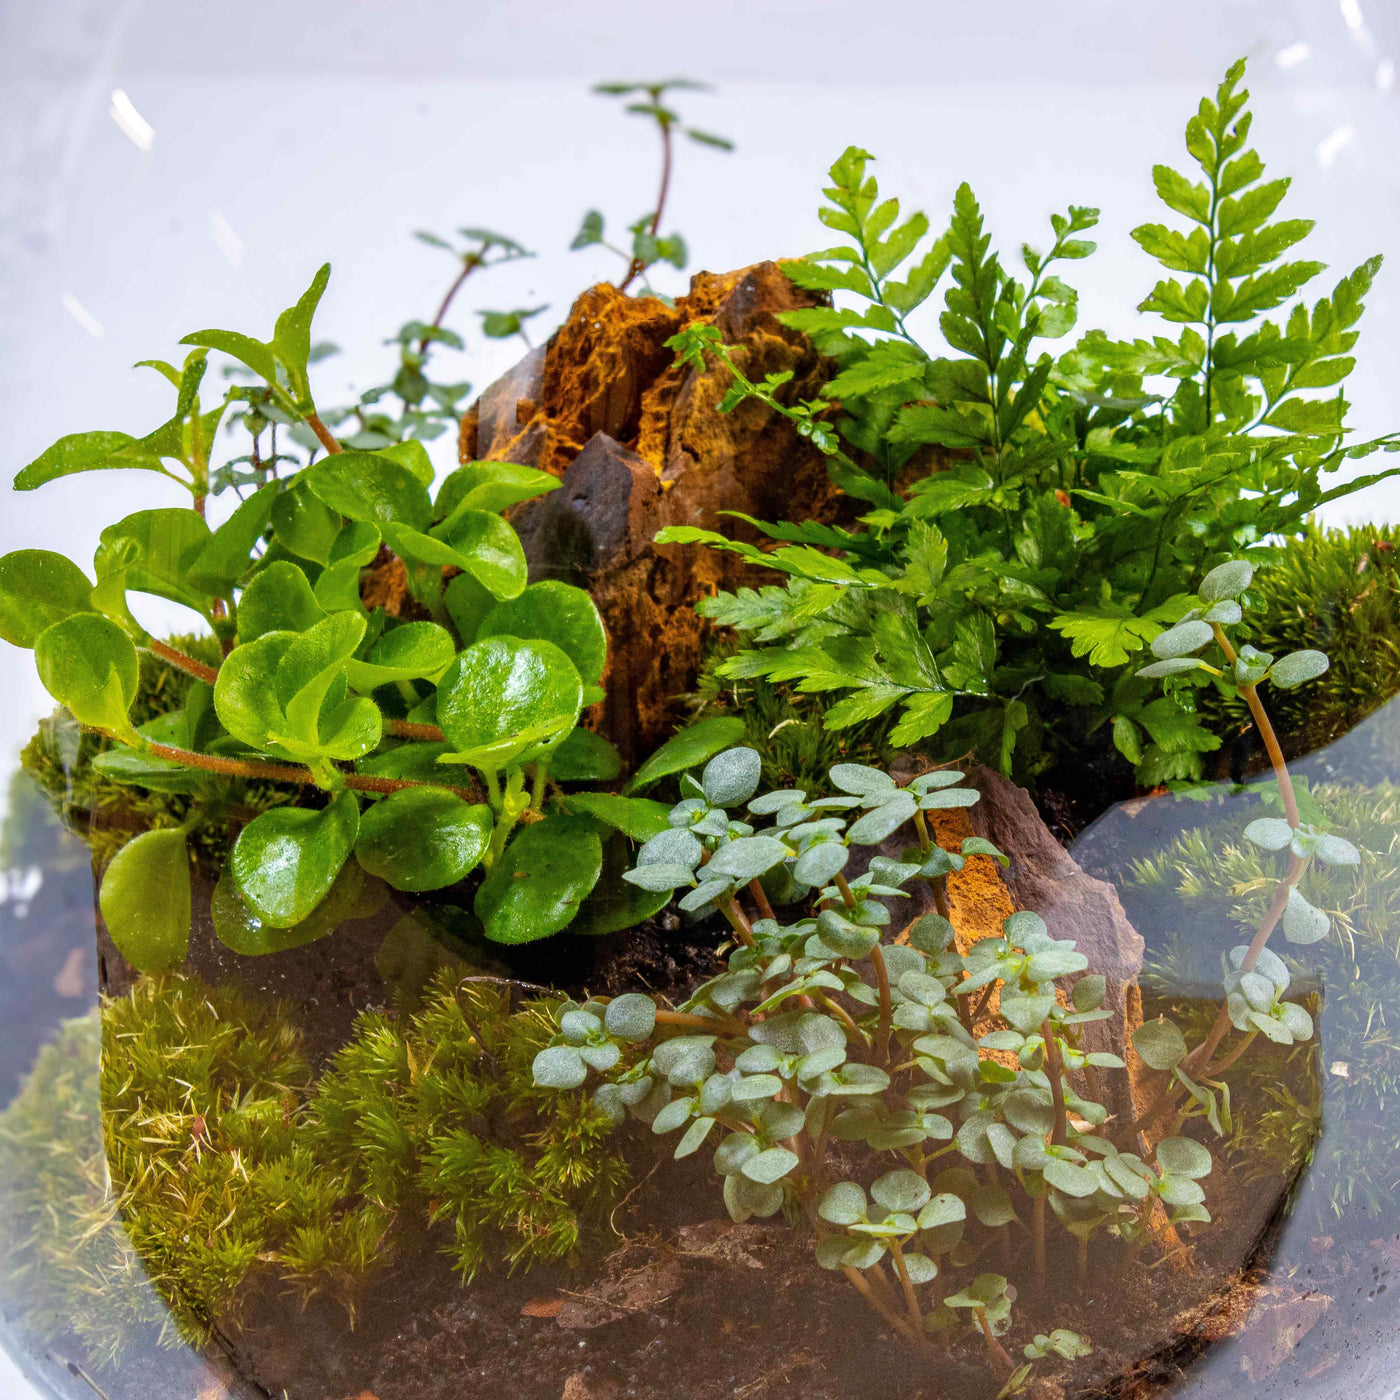 Bring nature indoors with our UK-friendly tropical terrarium kit, complete with live plants and moss."